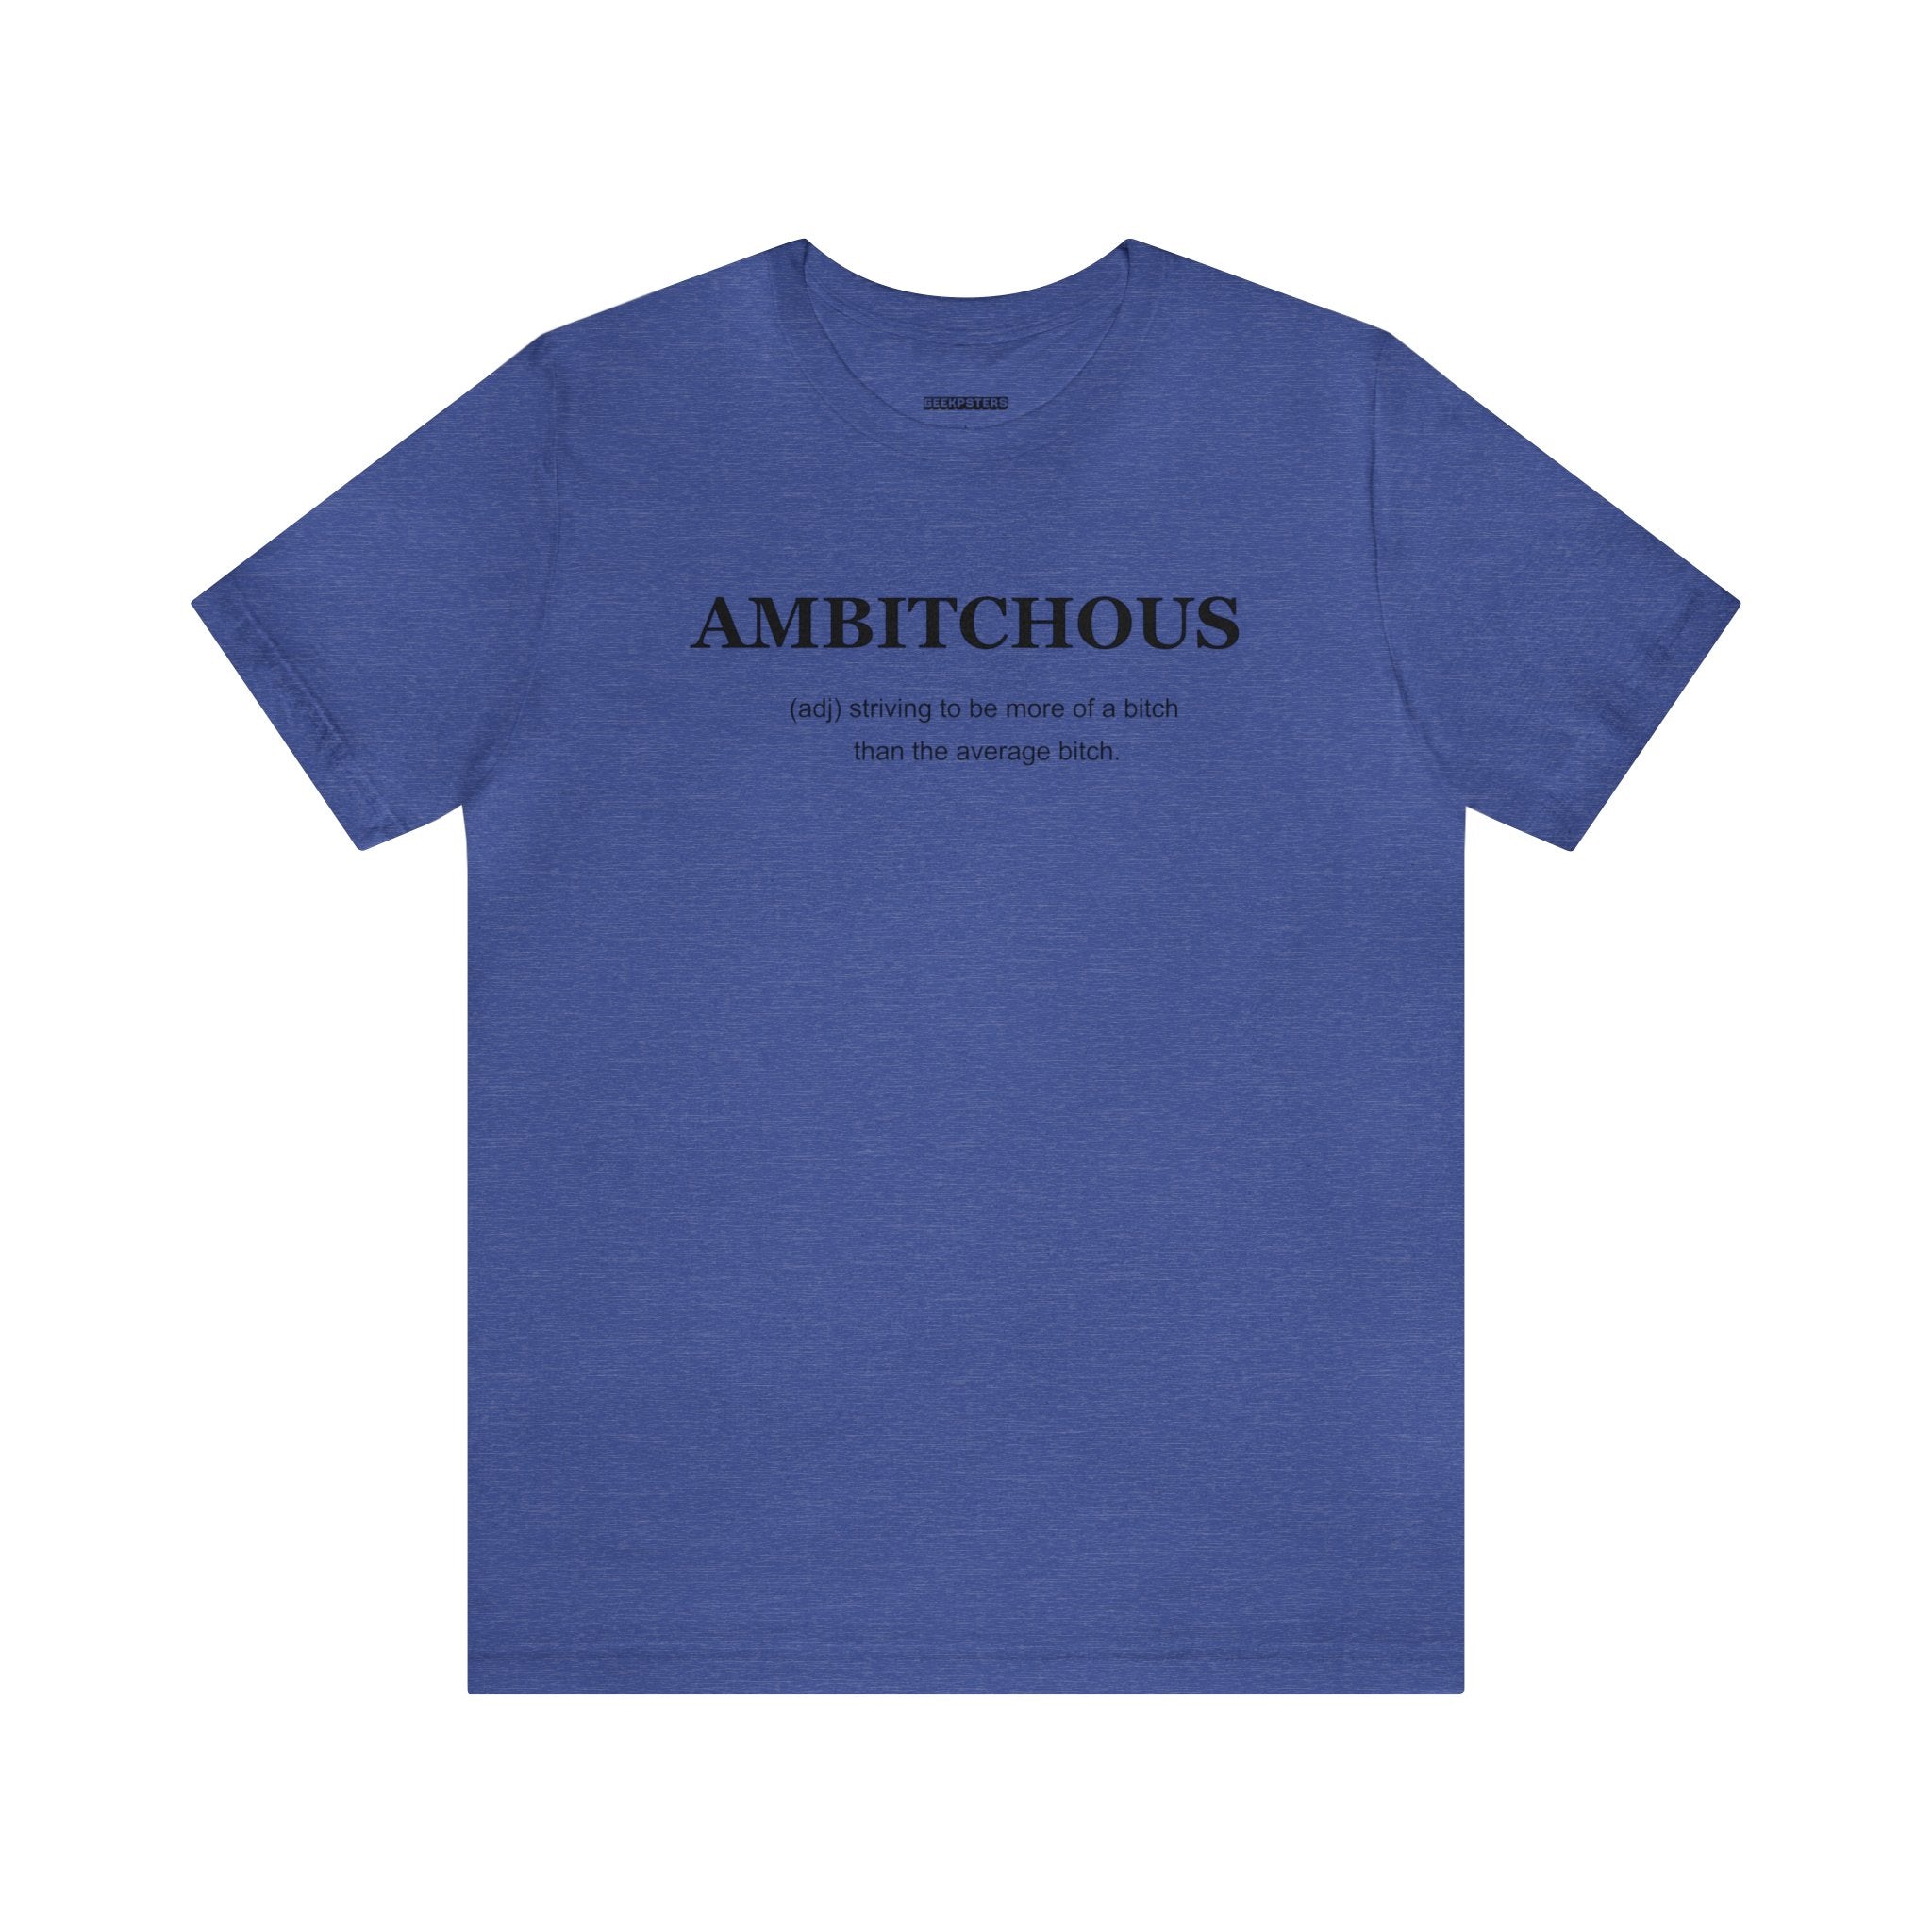 A blue Empowering Ambitchious T Shirt.